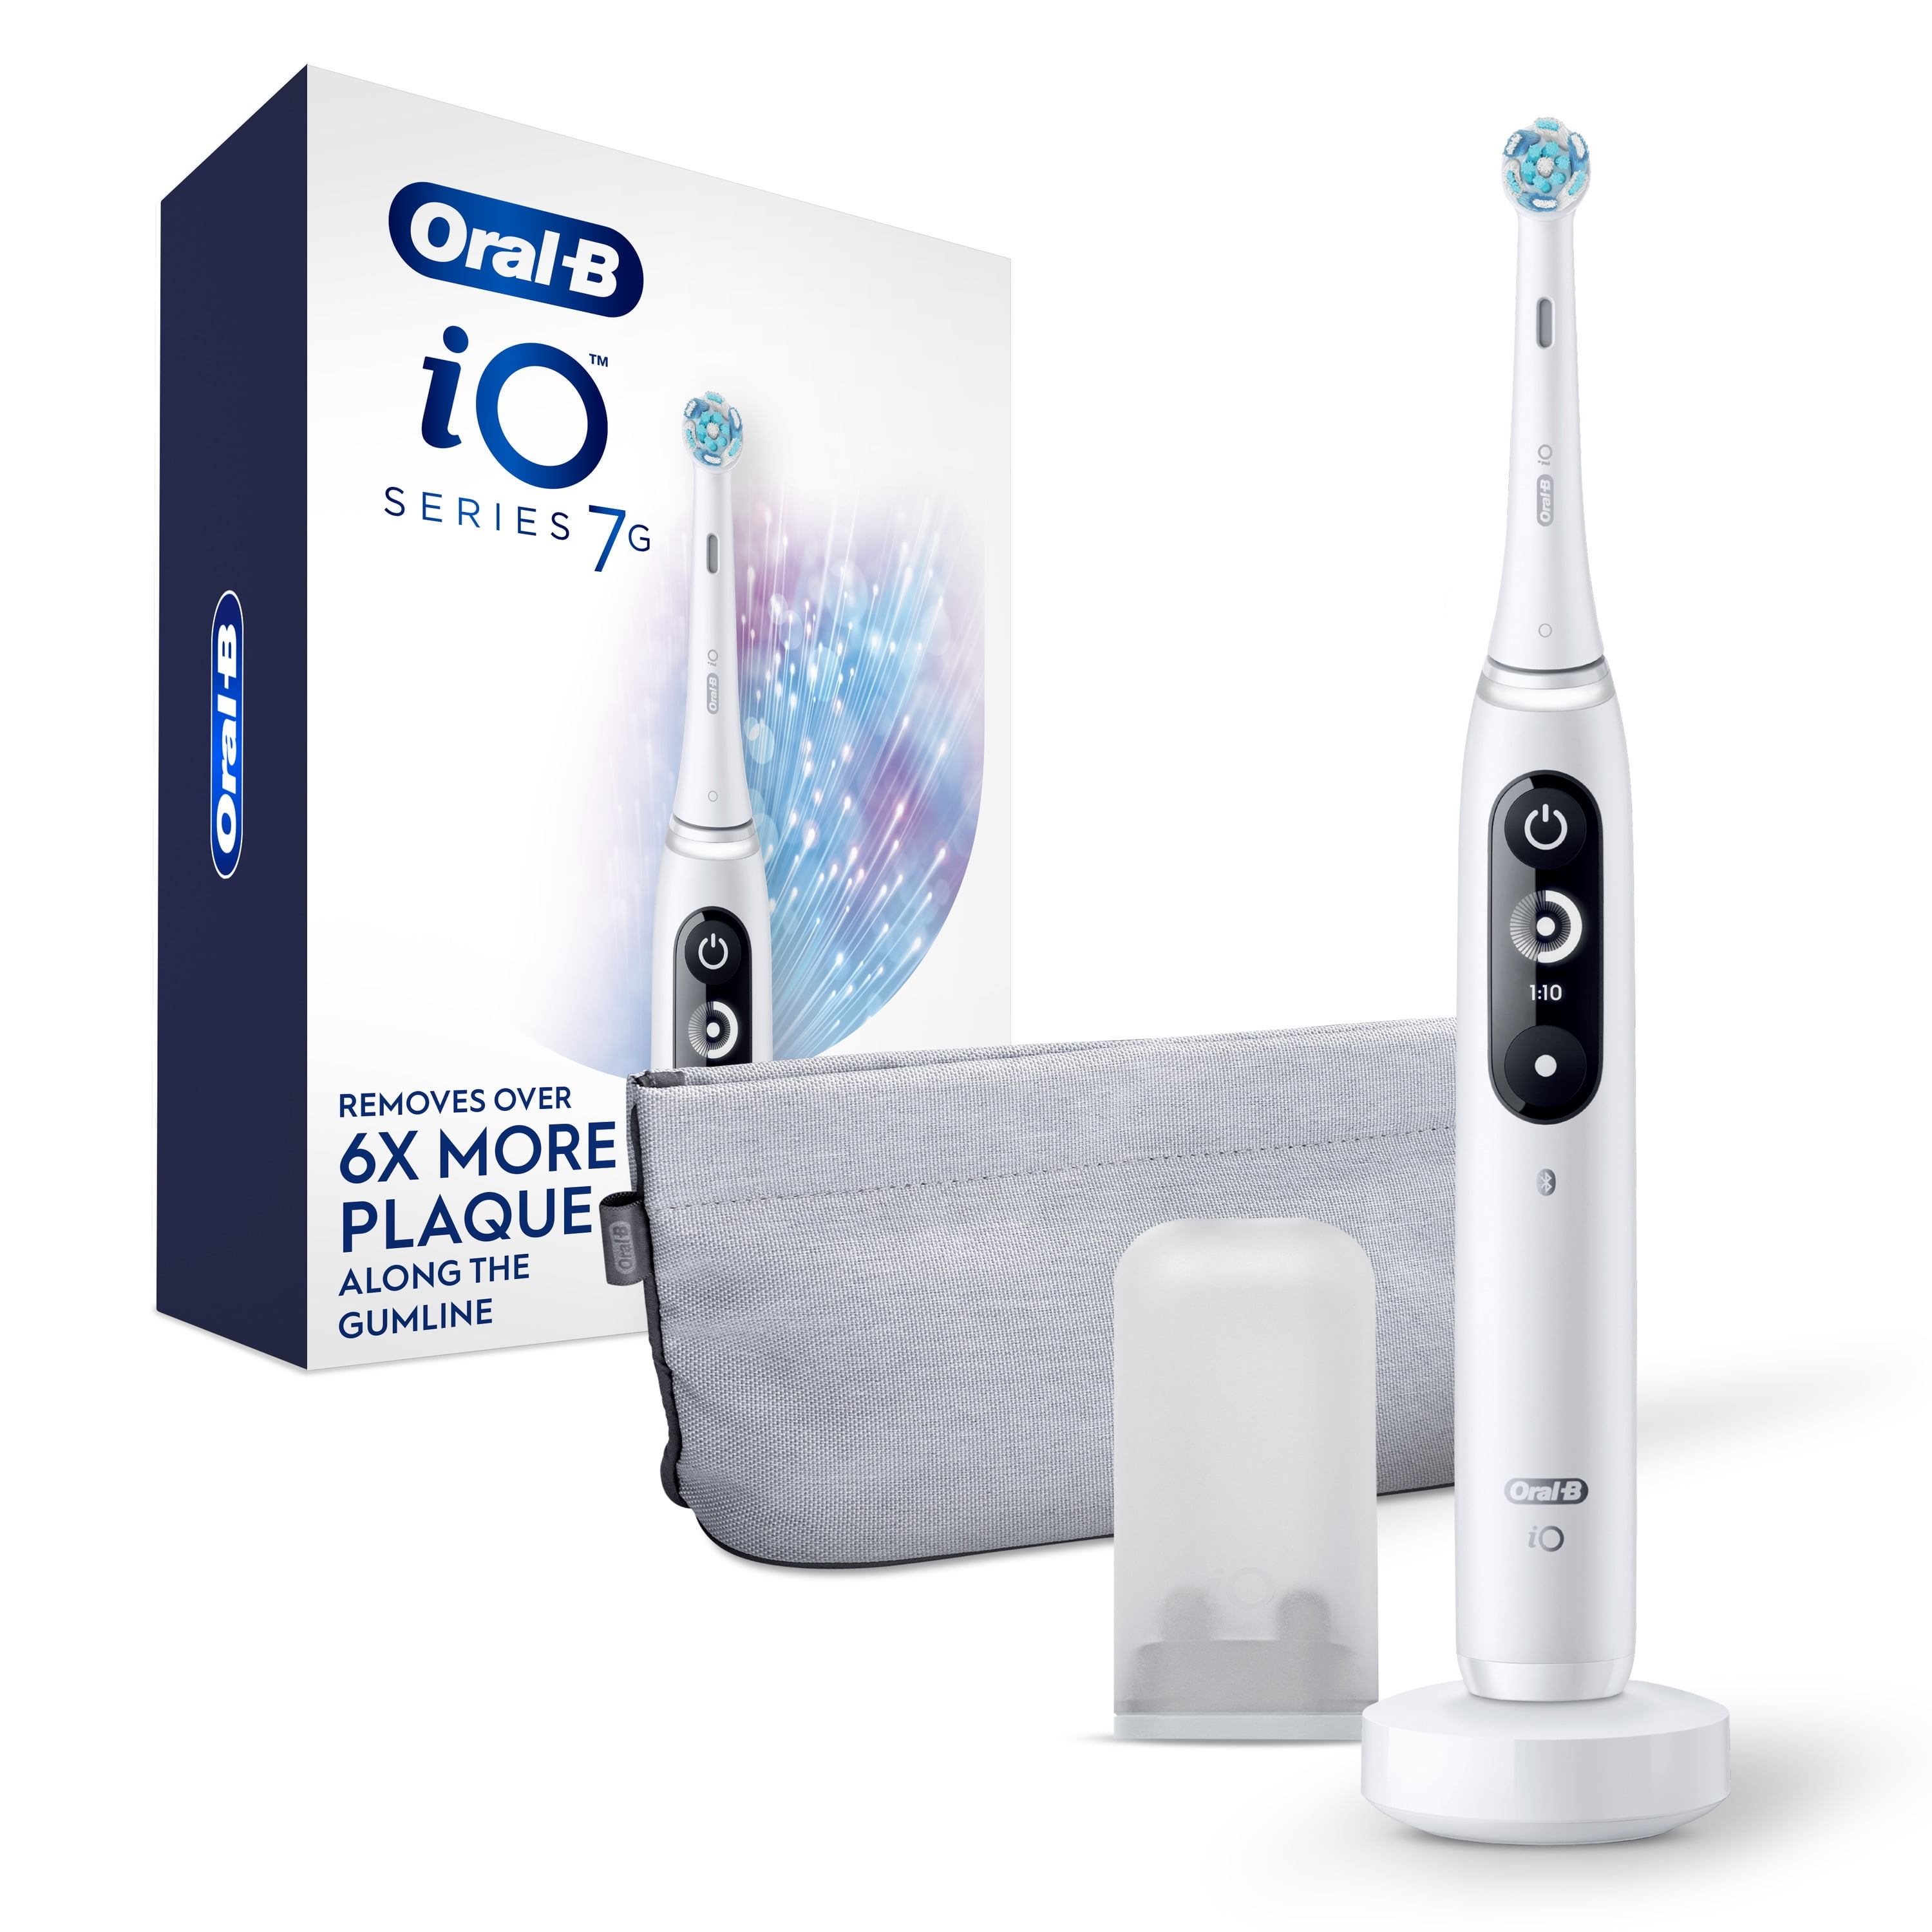 Oral-B iO Series 7G Electric Toothbrush with 1 Brush White Alabster - Walmart.com